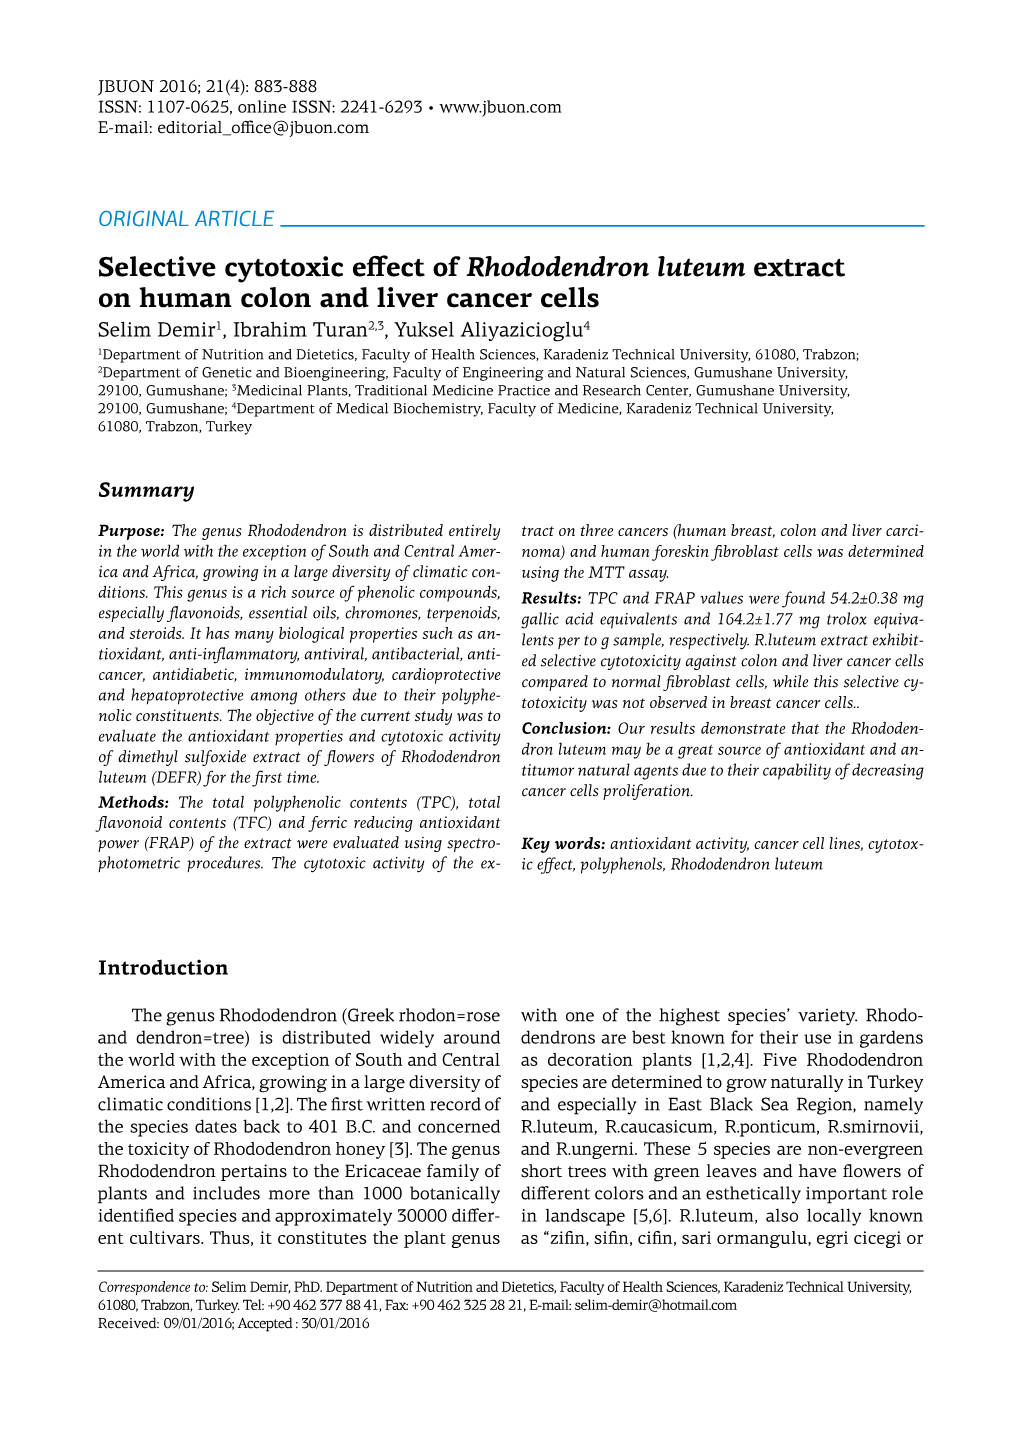 Selective Cytotoxic Effect of Rhododendron Luteum Extract On